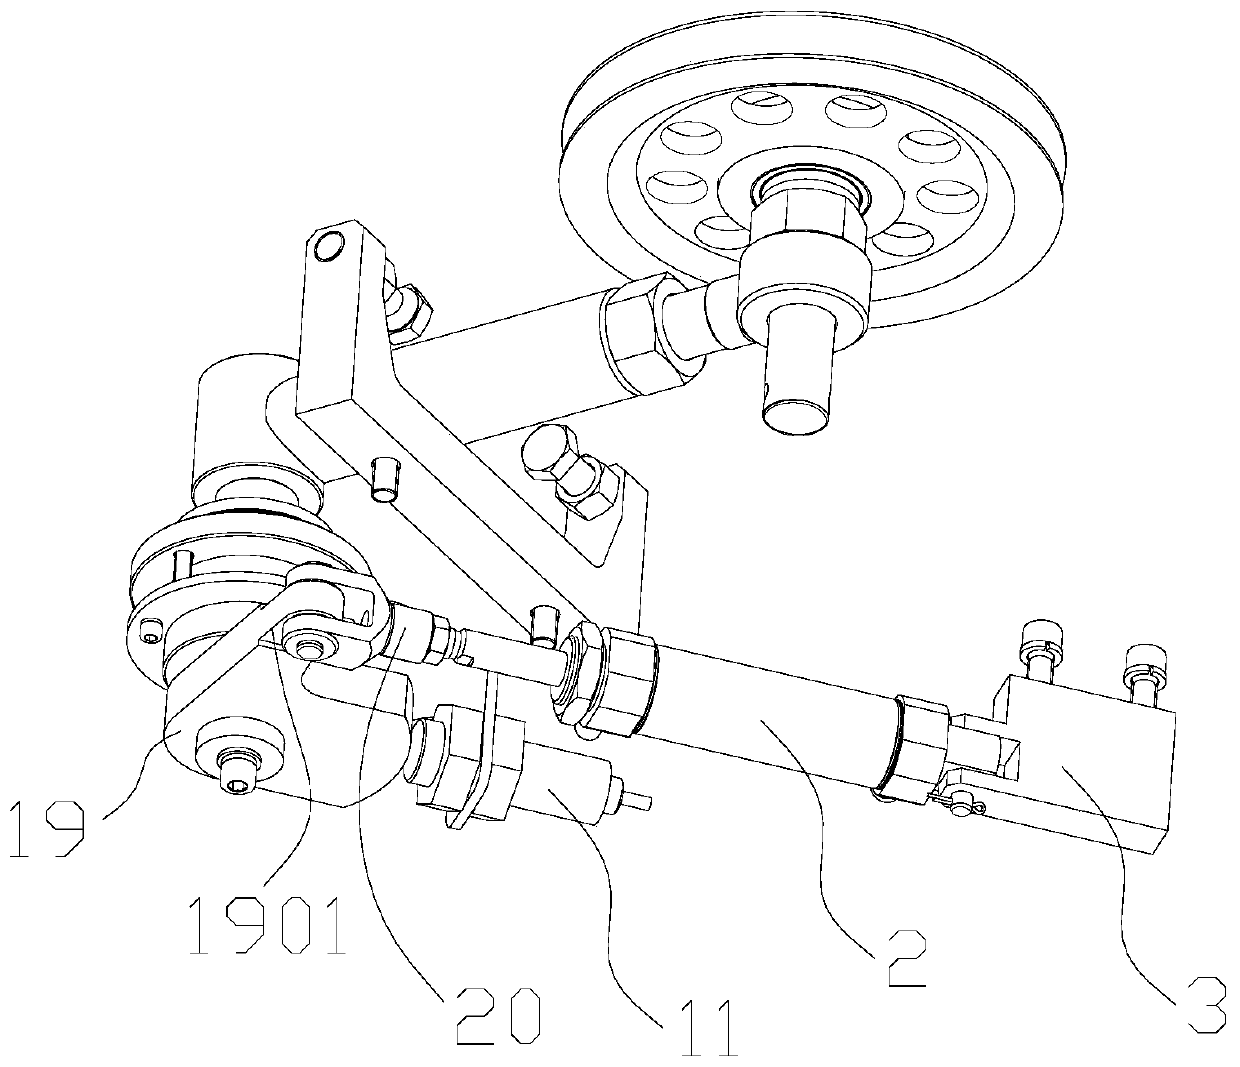 Guide wheel device with three adjustable degrees of freedom